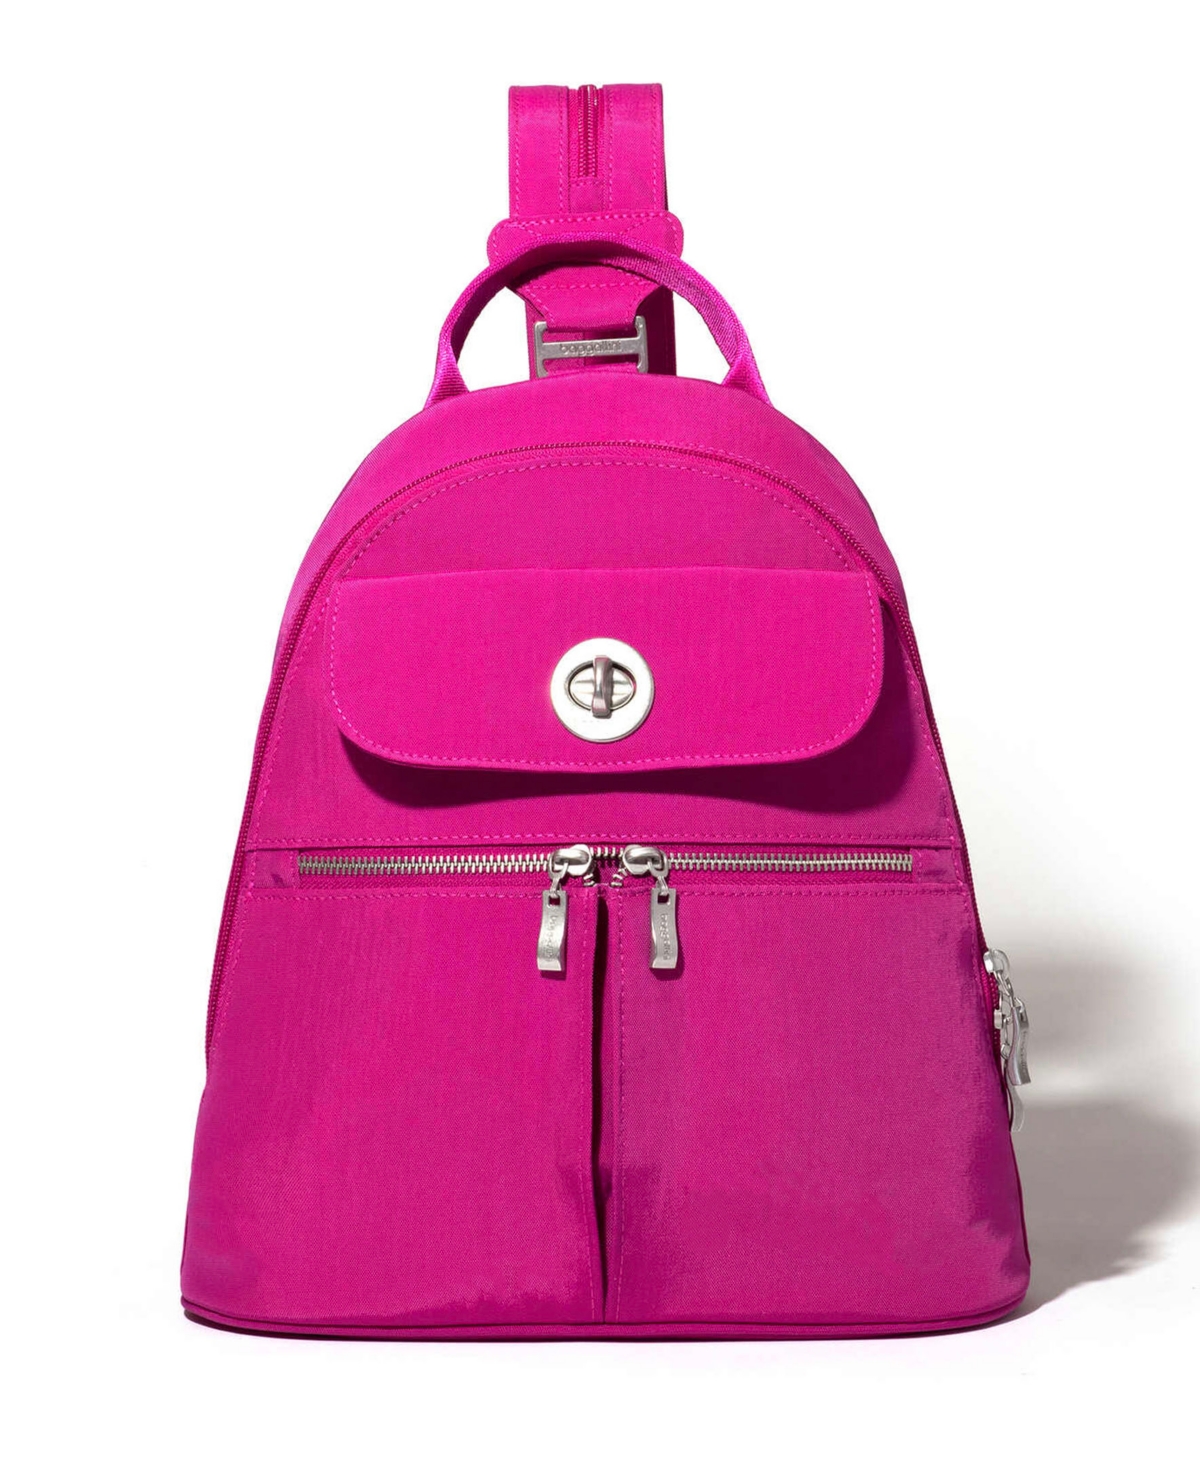 Baggallini Naples Convertible Backpack In Pink